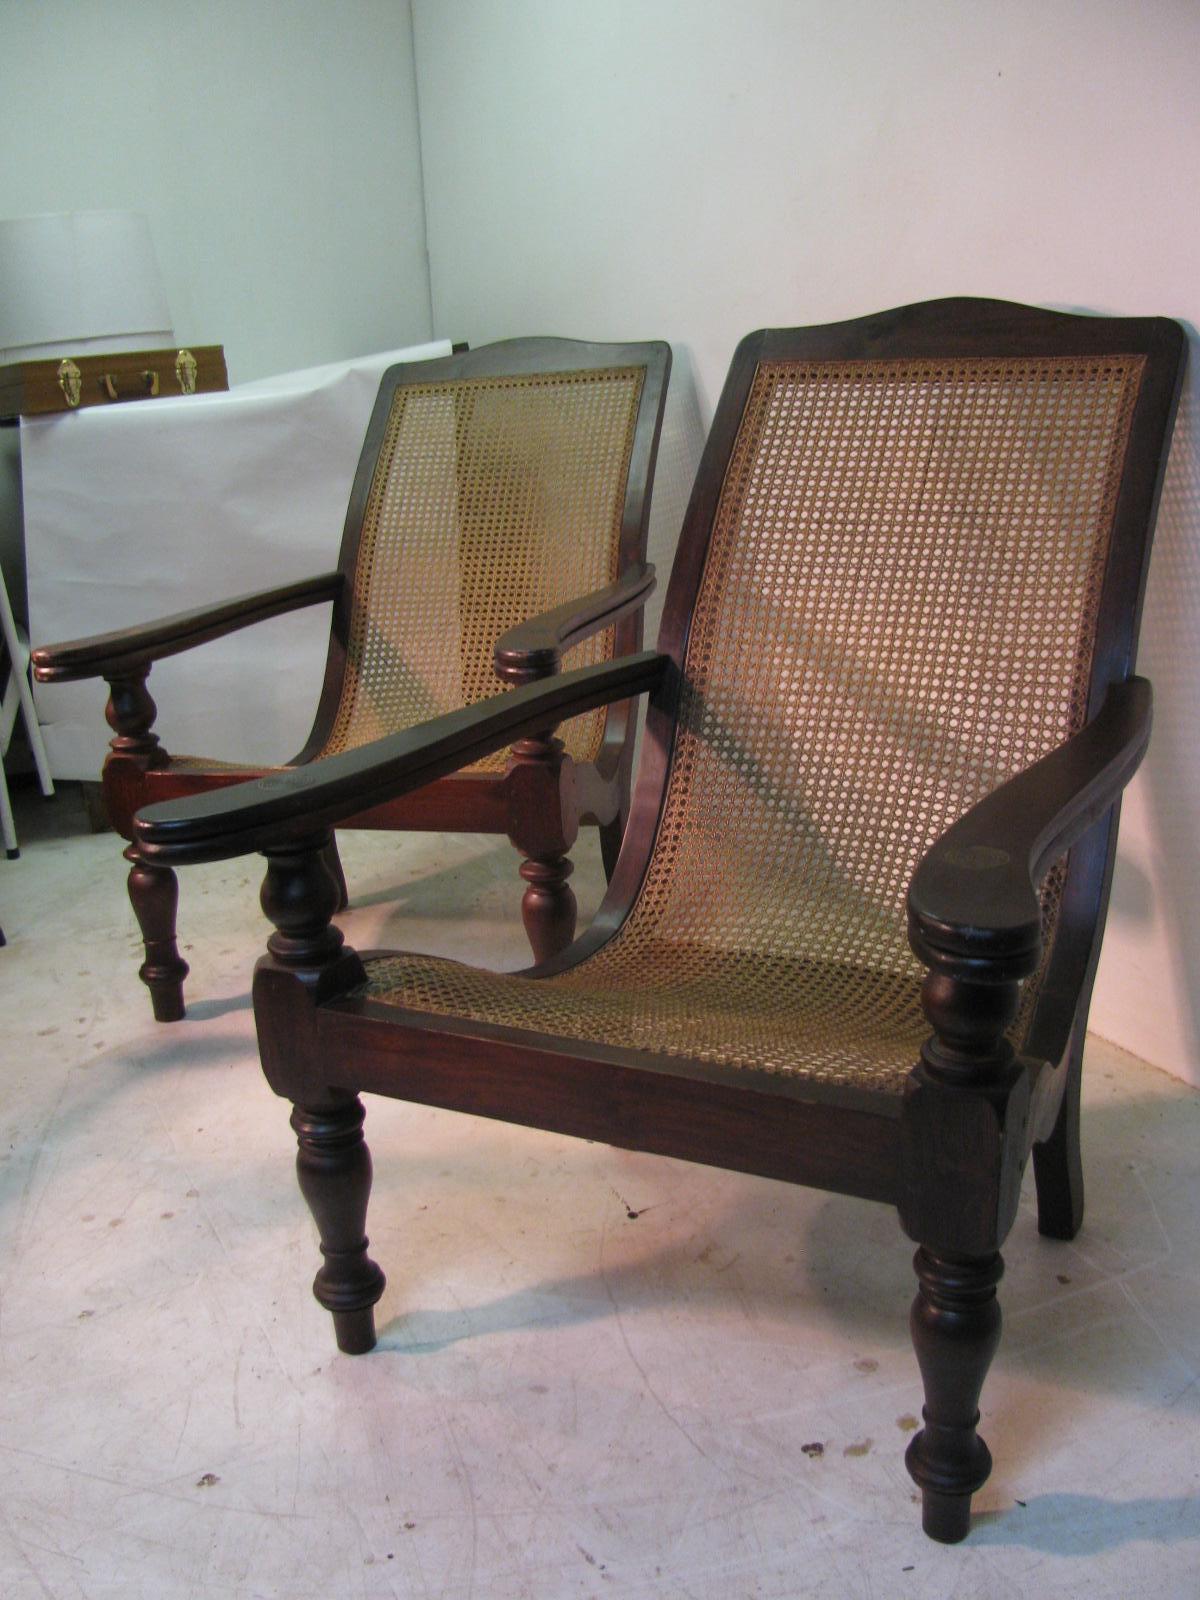 Elegant pair of solid hard wood and caned British Colonial Plantation chairs, lounge chairs or armchairs. The chairs feature swing out extension arms. The construction is hand made with turned legs, mortise and tenon construction and they are